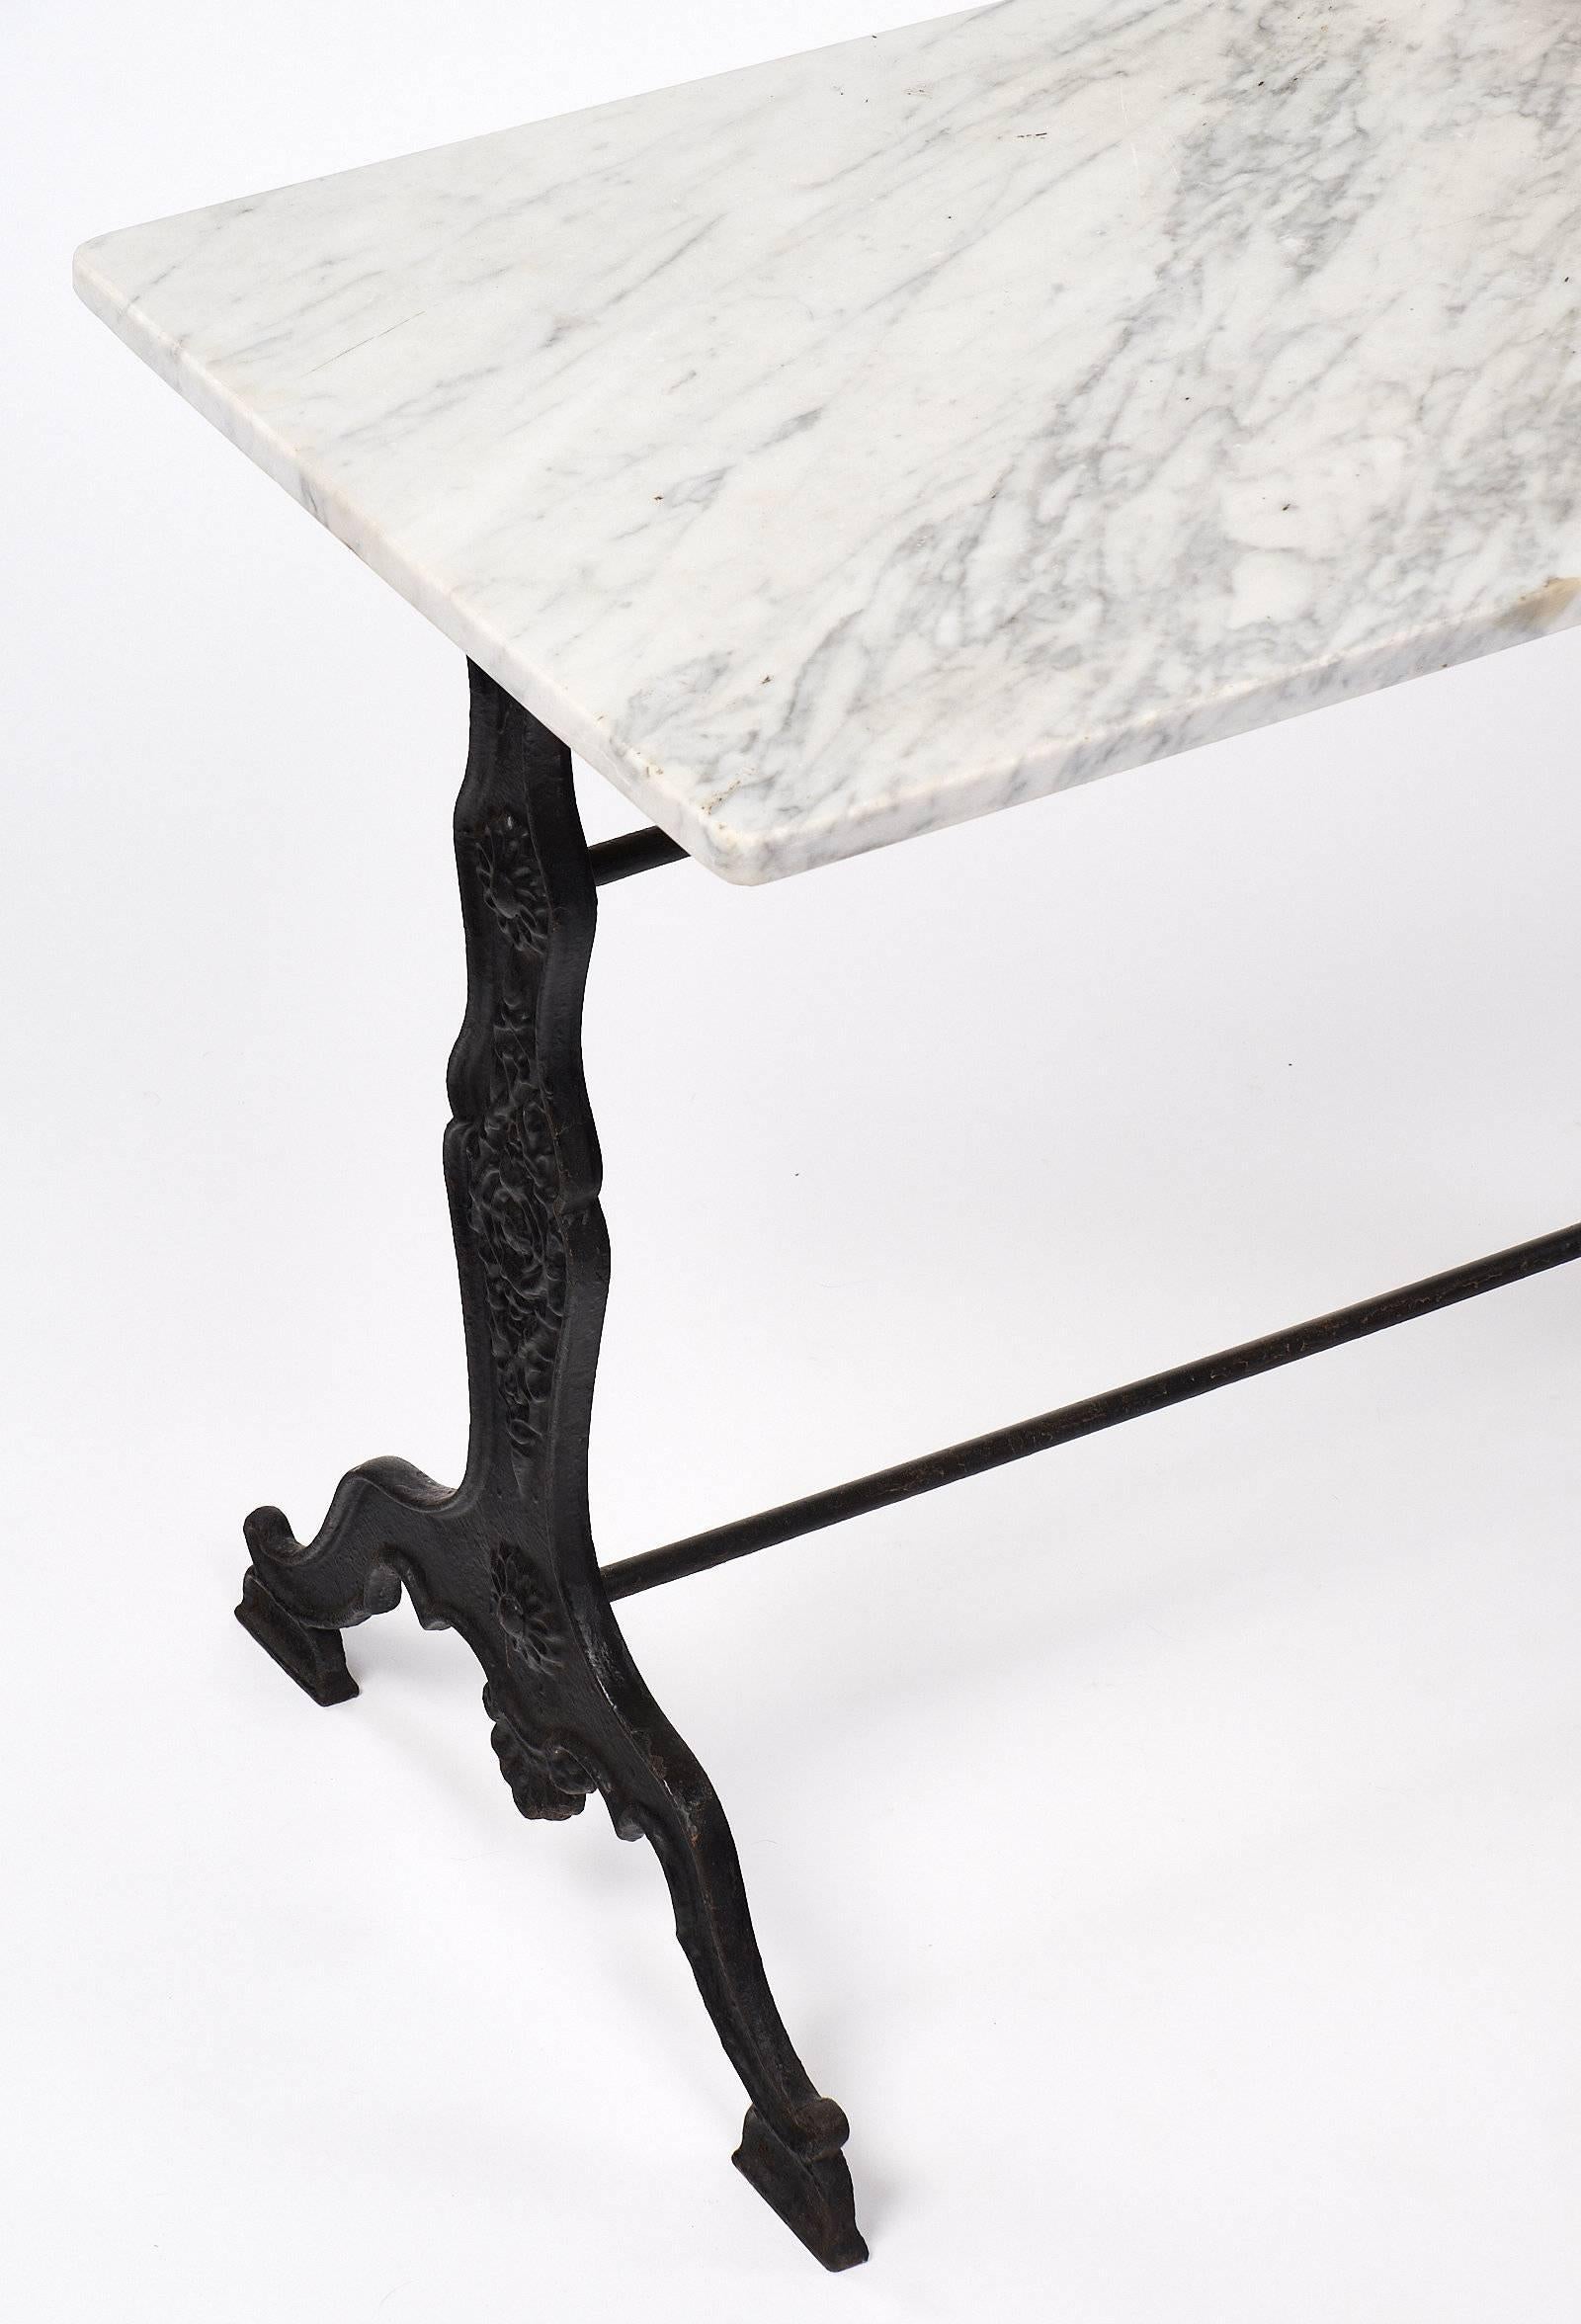 Antique French bistro table with the original Carrara marble top and a finely cast iron base. This piece brings charm to any space and is from Provence, France.
     